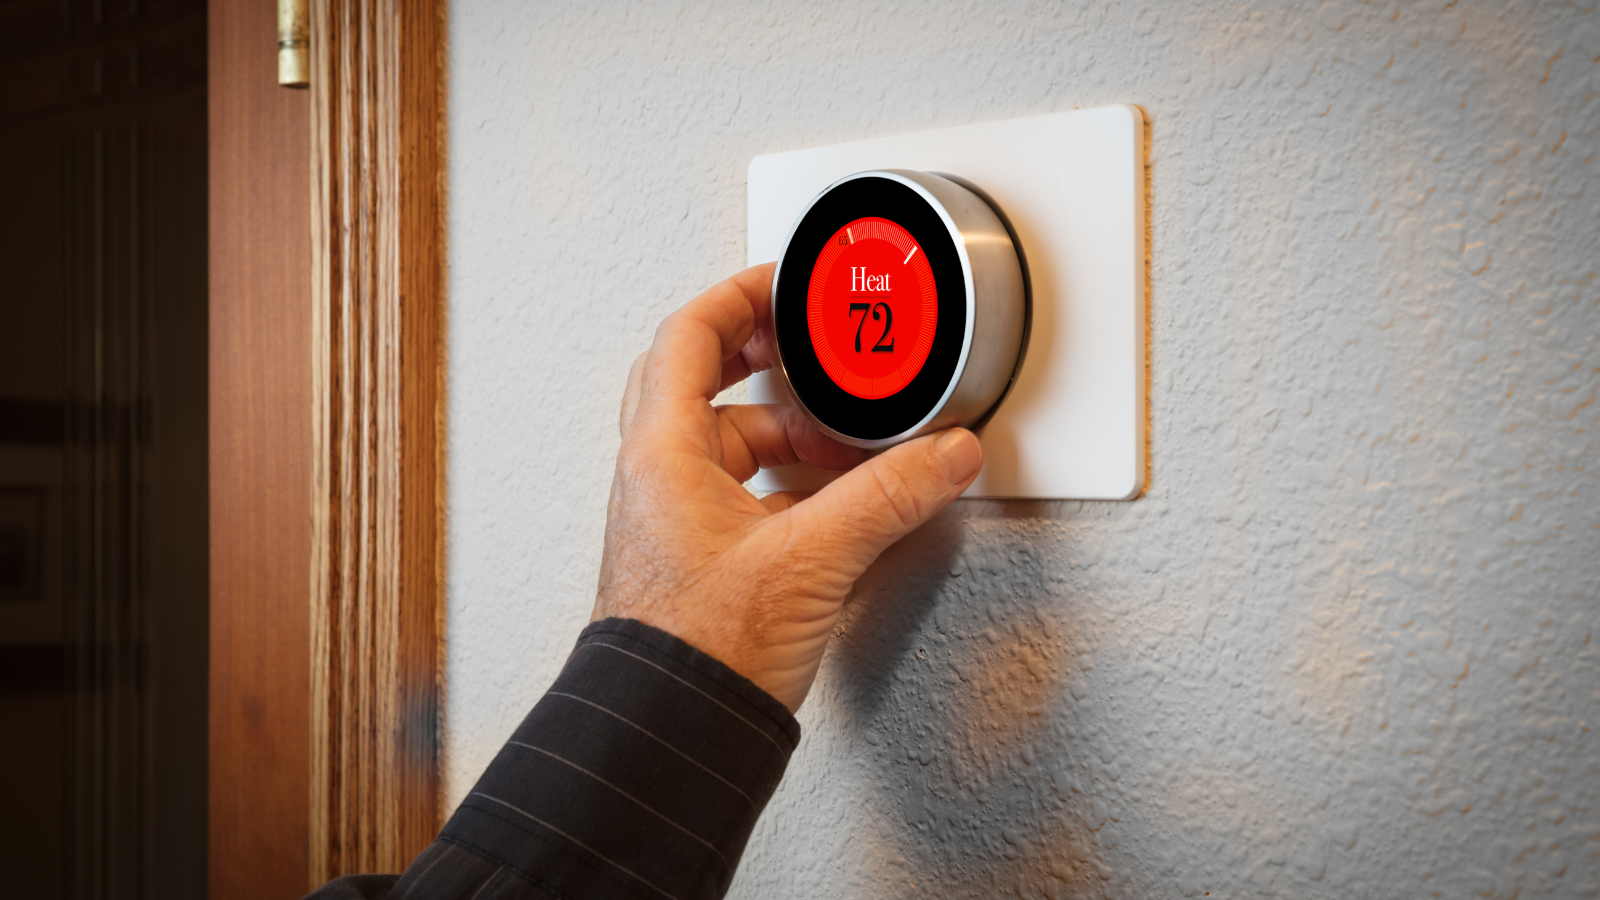 Google Nest Thermostat in use in home